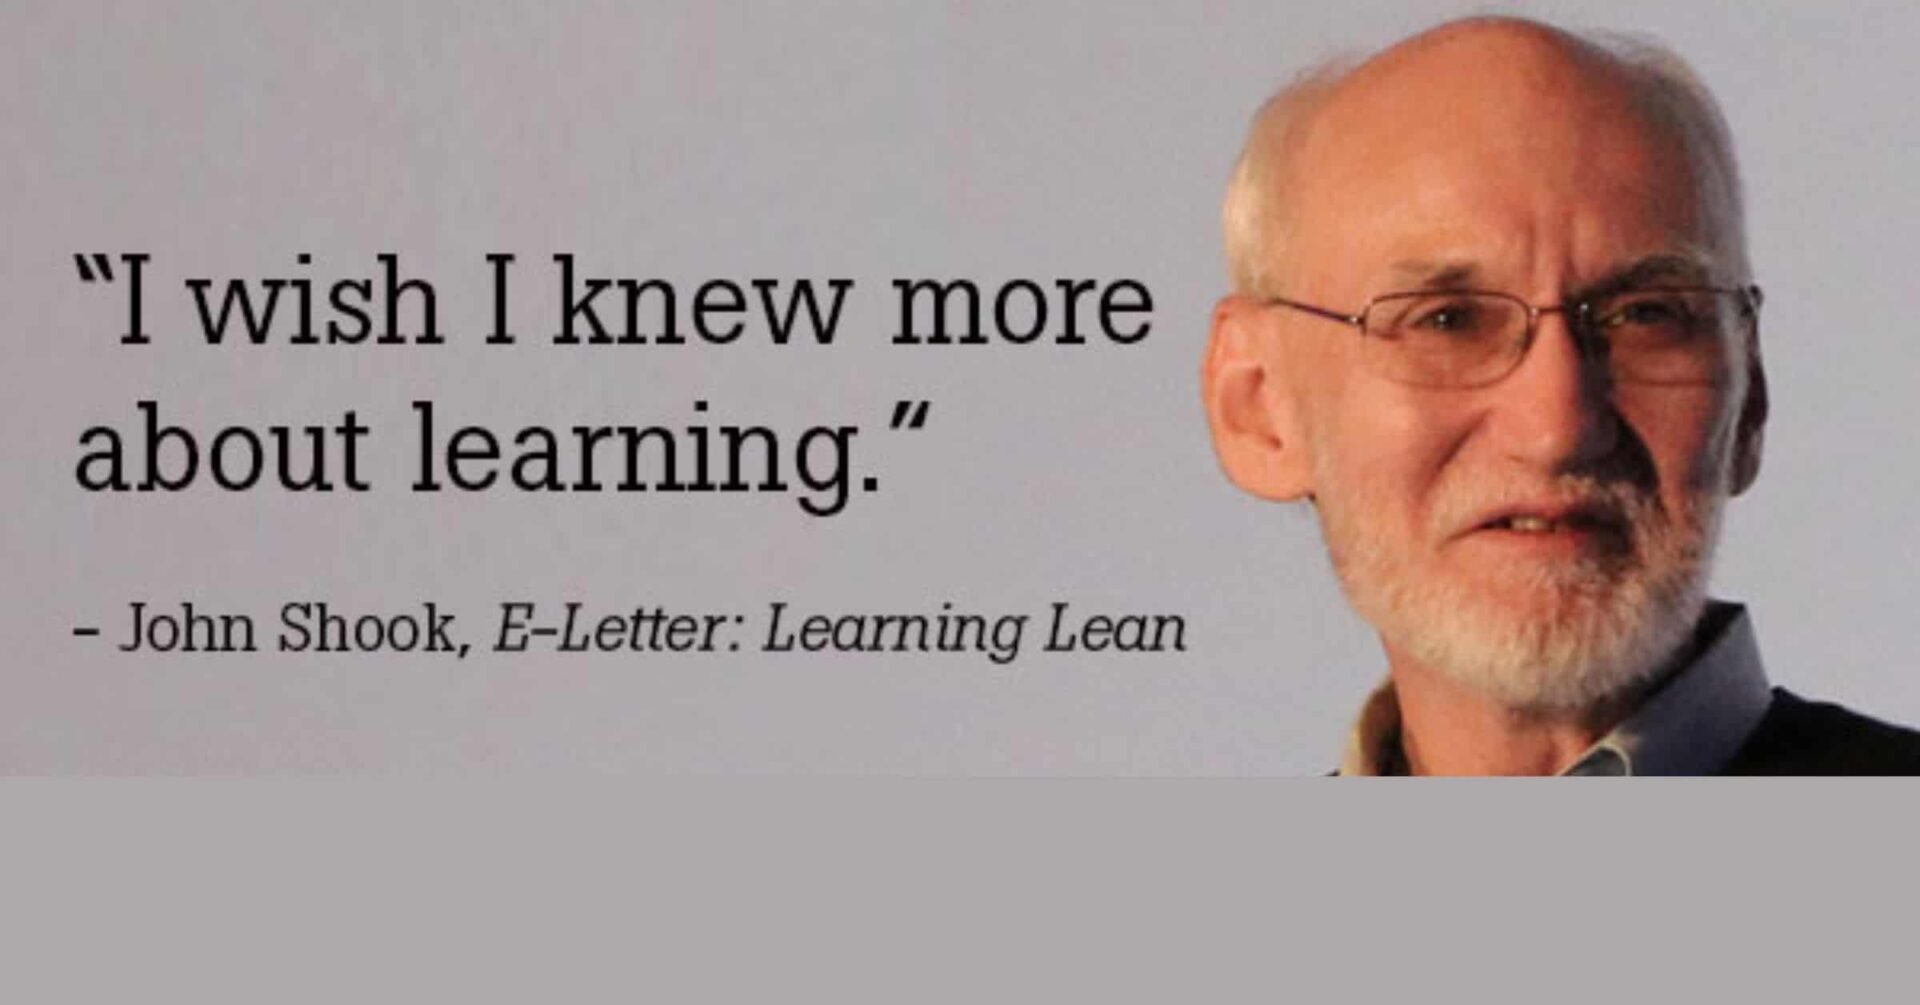 A quote from John Shook, stating, "I wish I knew more about learning," from his E-Letter titled "Learning Lean." The image includes a picture of John Shook, a prominent figure in the Lean community, known for his expertise in Lean management and continuous improvement.